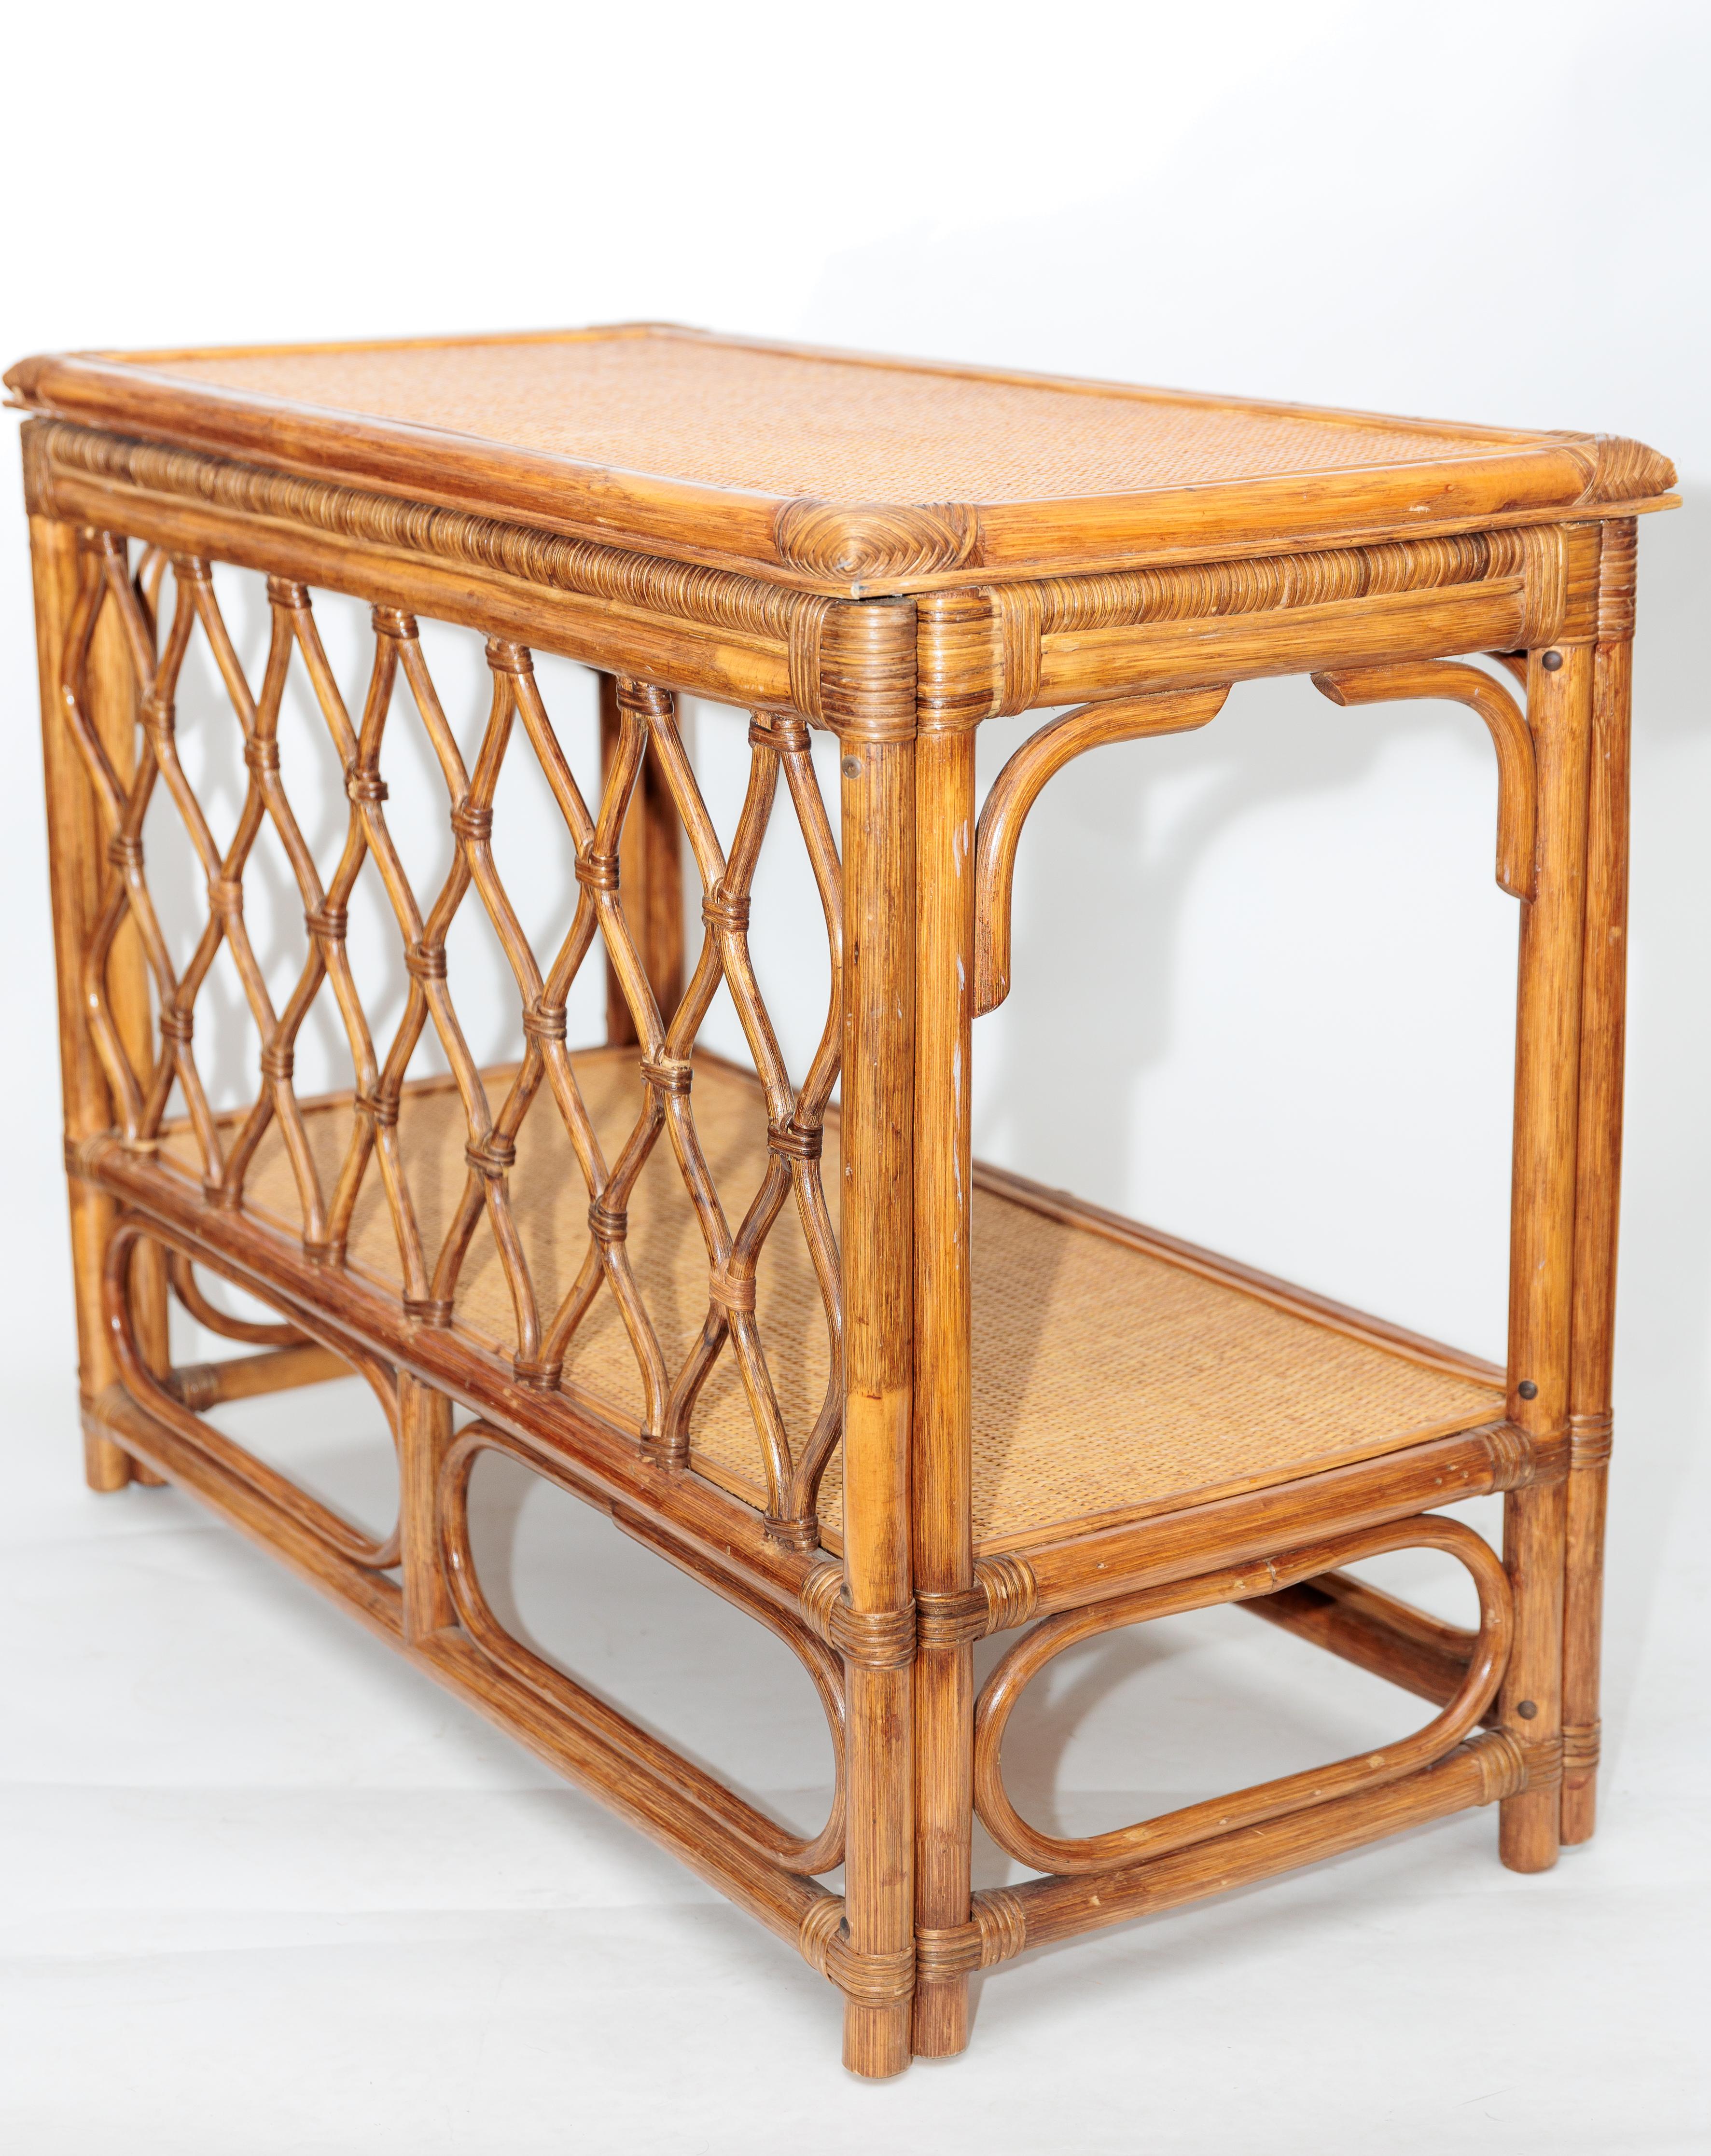 20th Century Pair of Bamboo and Rattan Tables with Woven Back Detail and Shelf